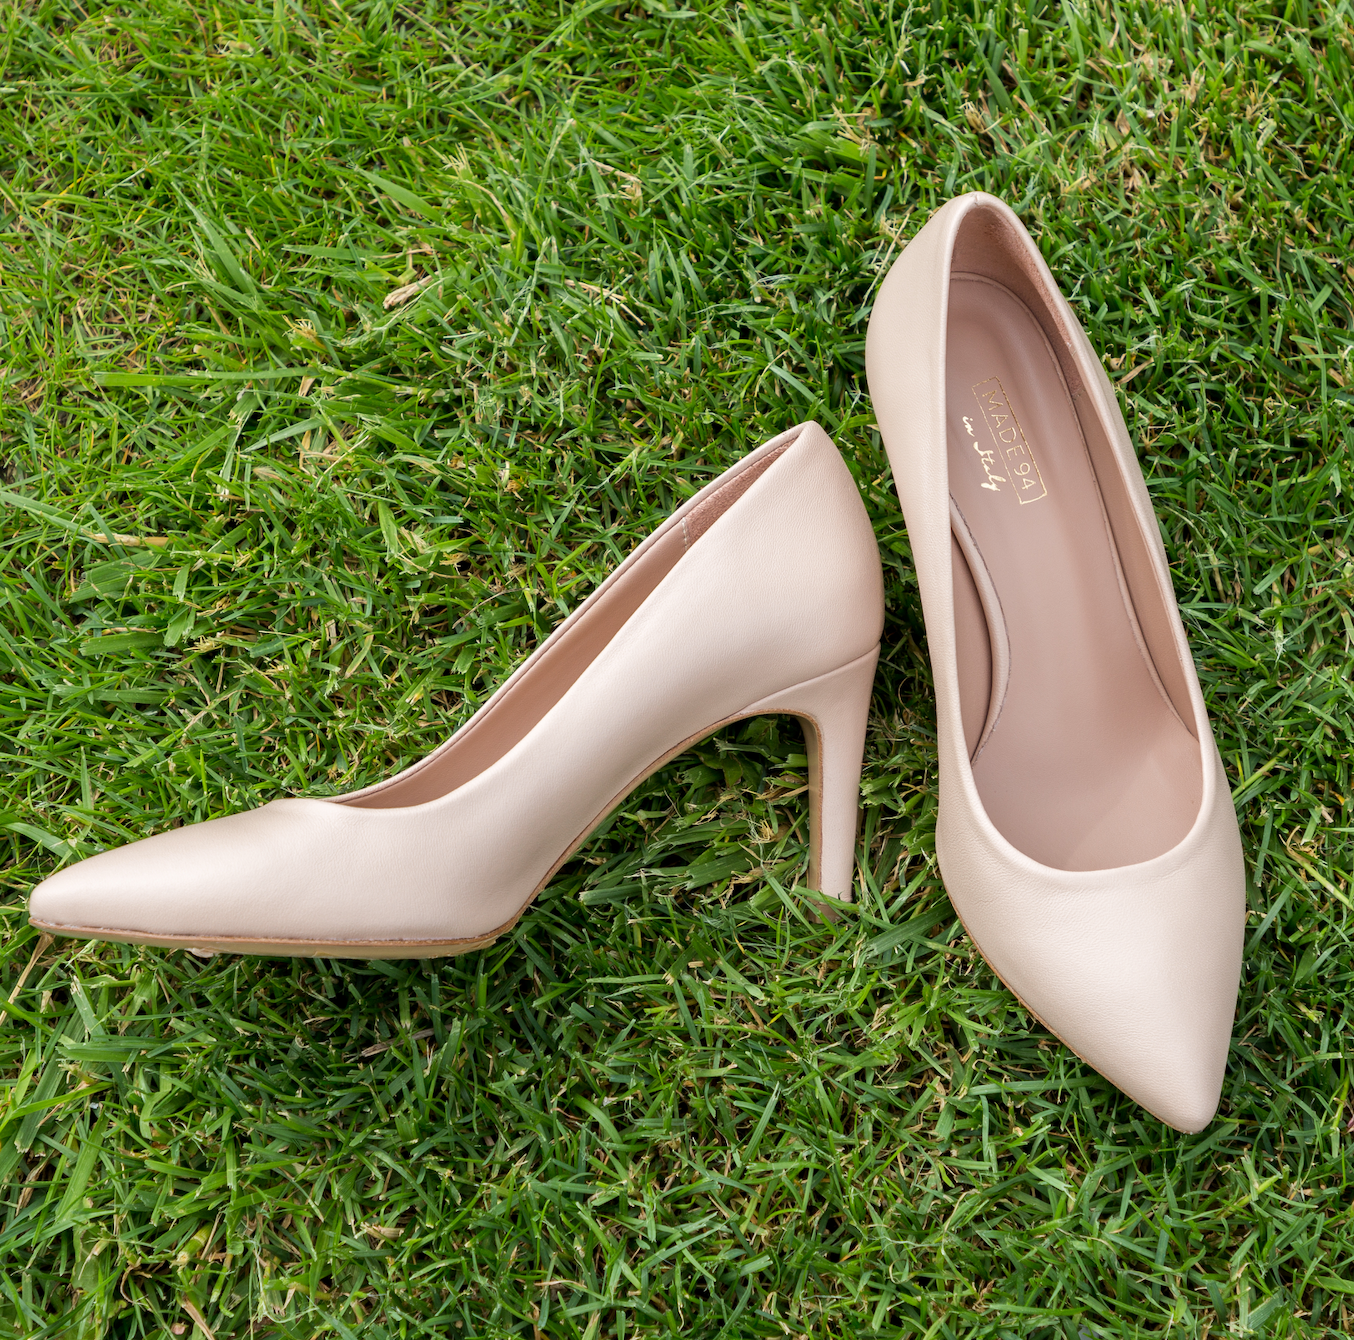 Rosa Nude Leather Pumps Heels 790-004-1 - 6